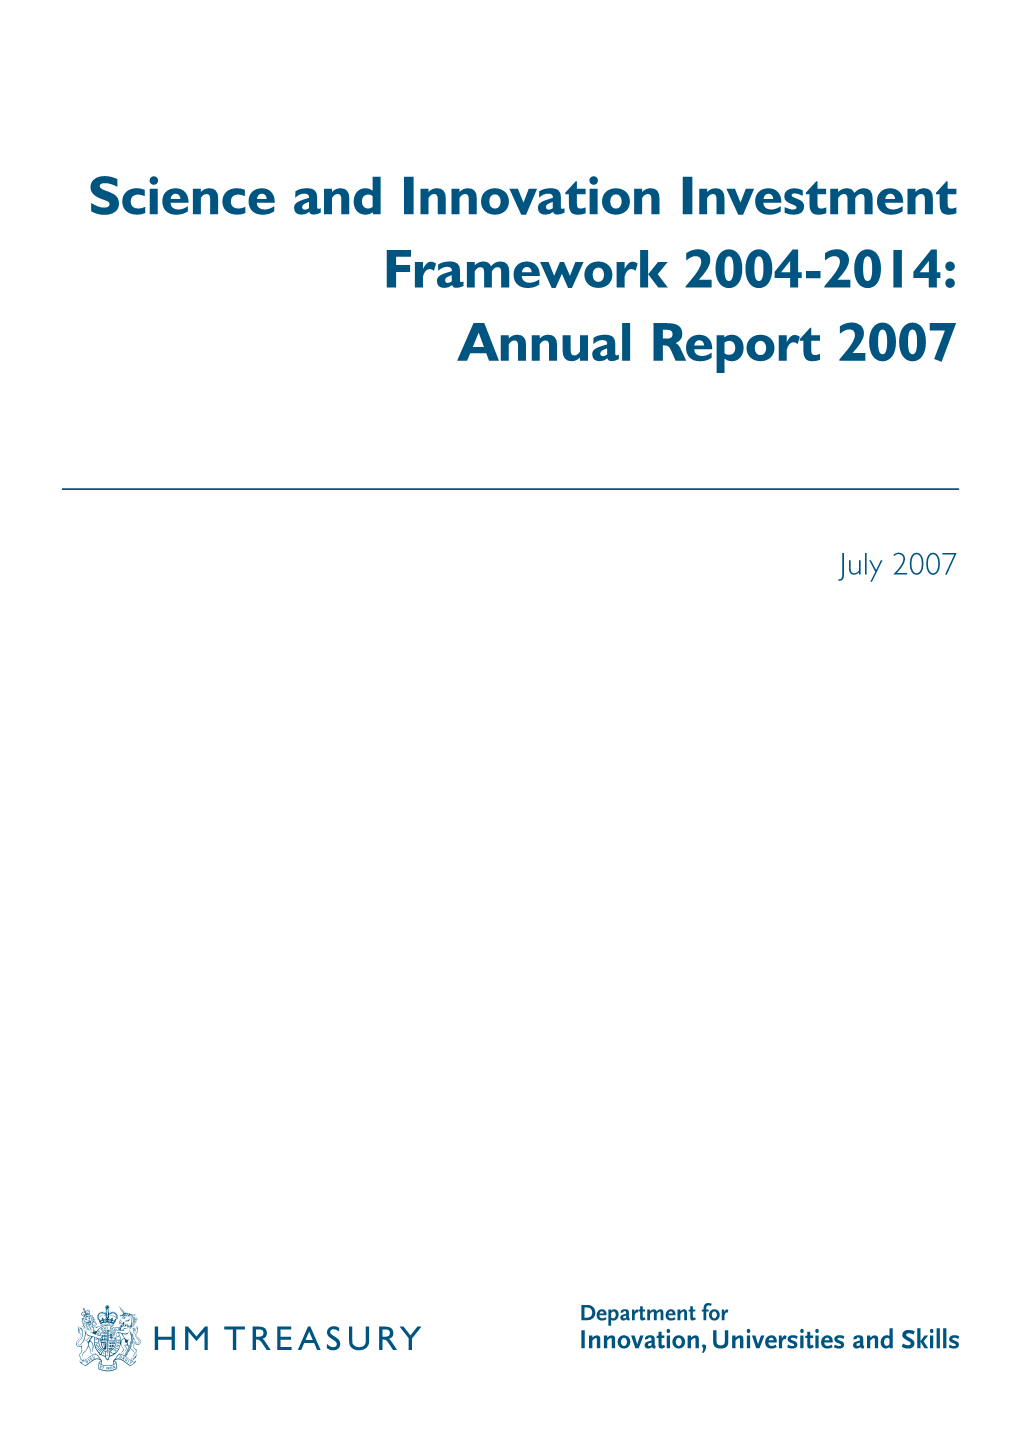 Science and Innovation Investment Framework 2004-2014: Annual Report 2007